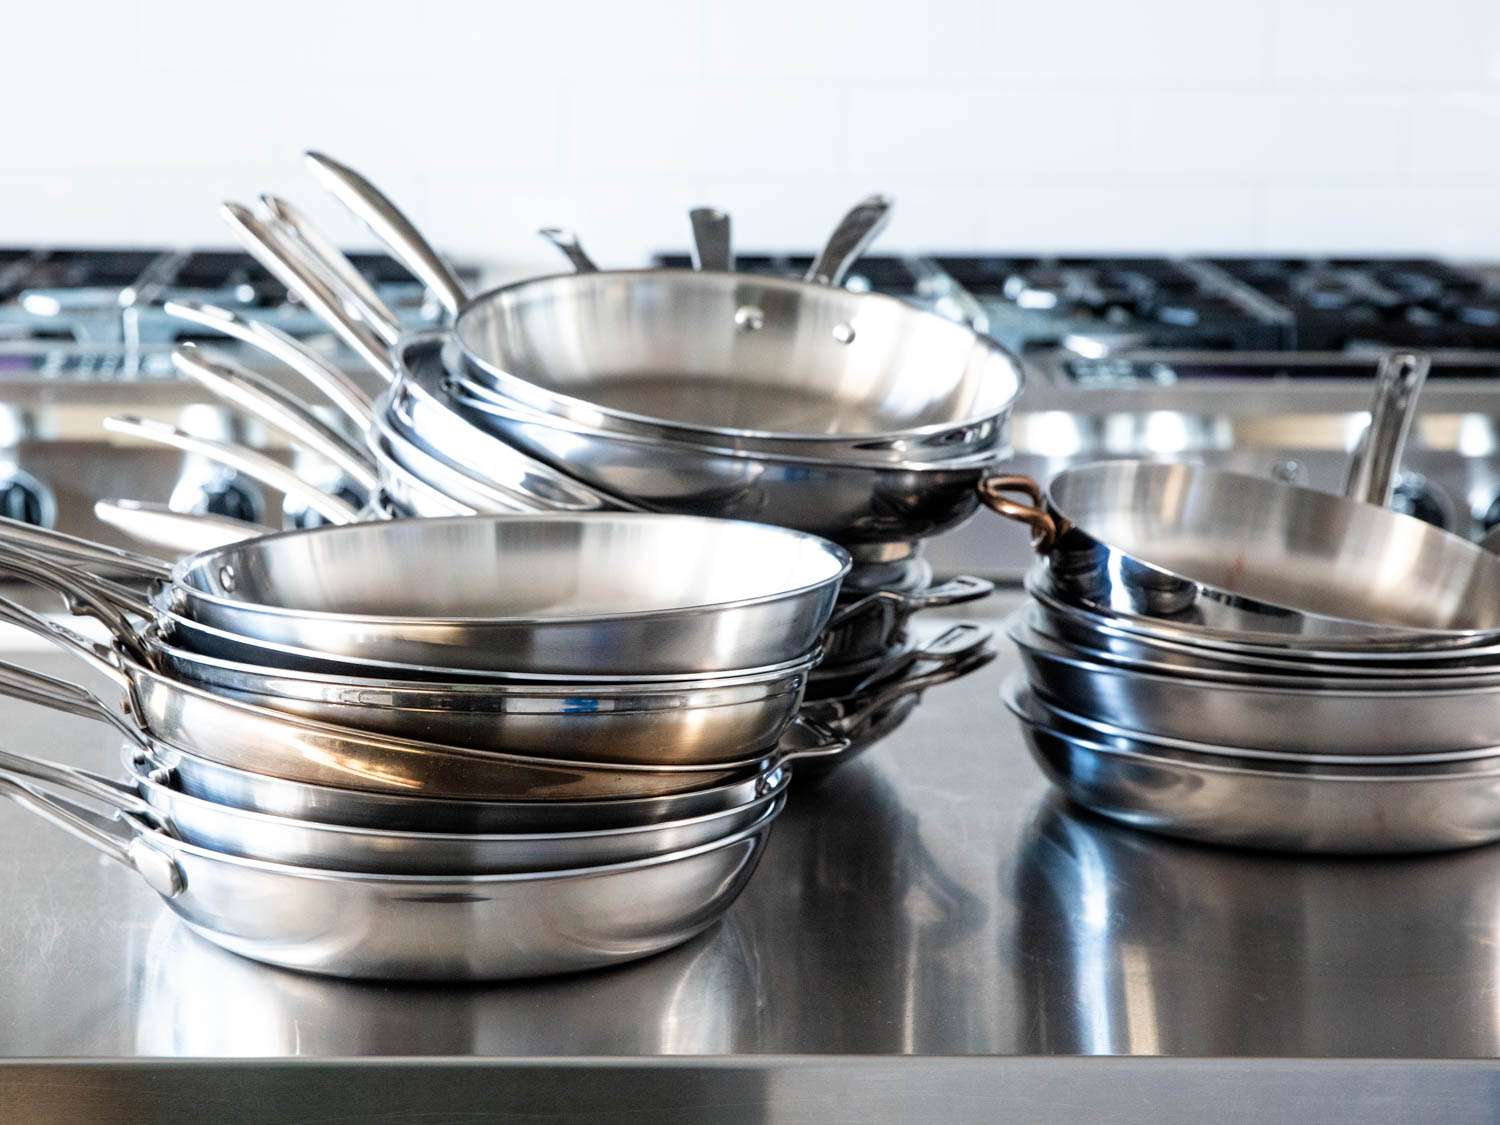 three stacks of stainless steel skillets